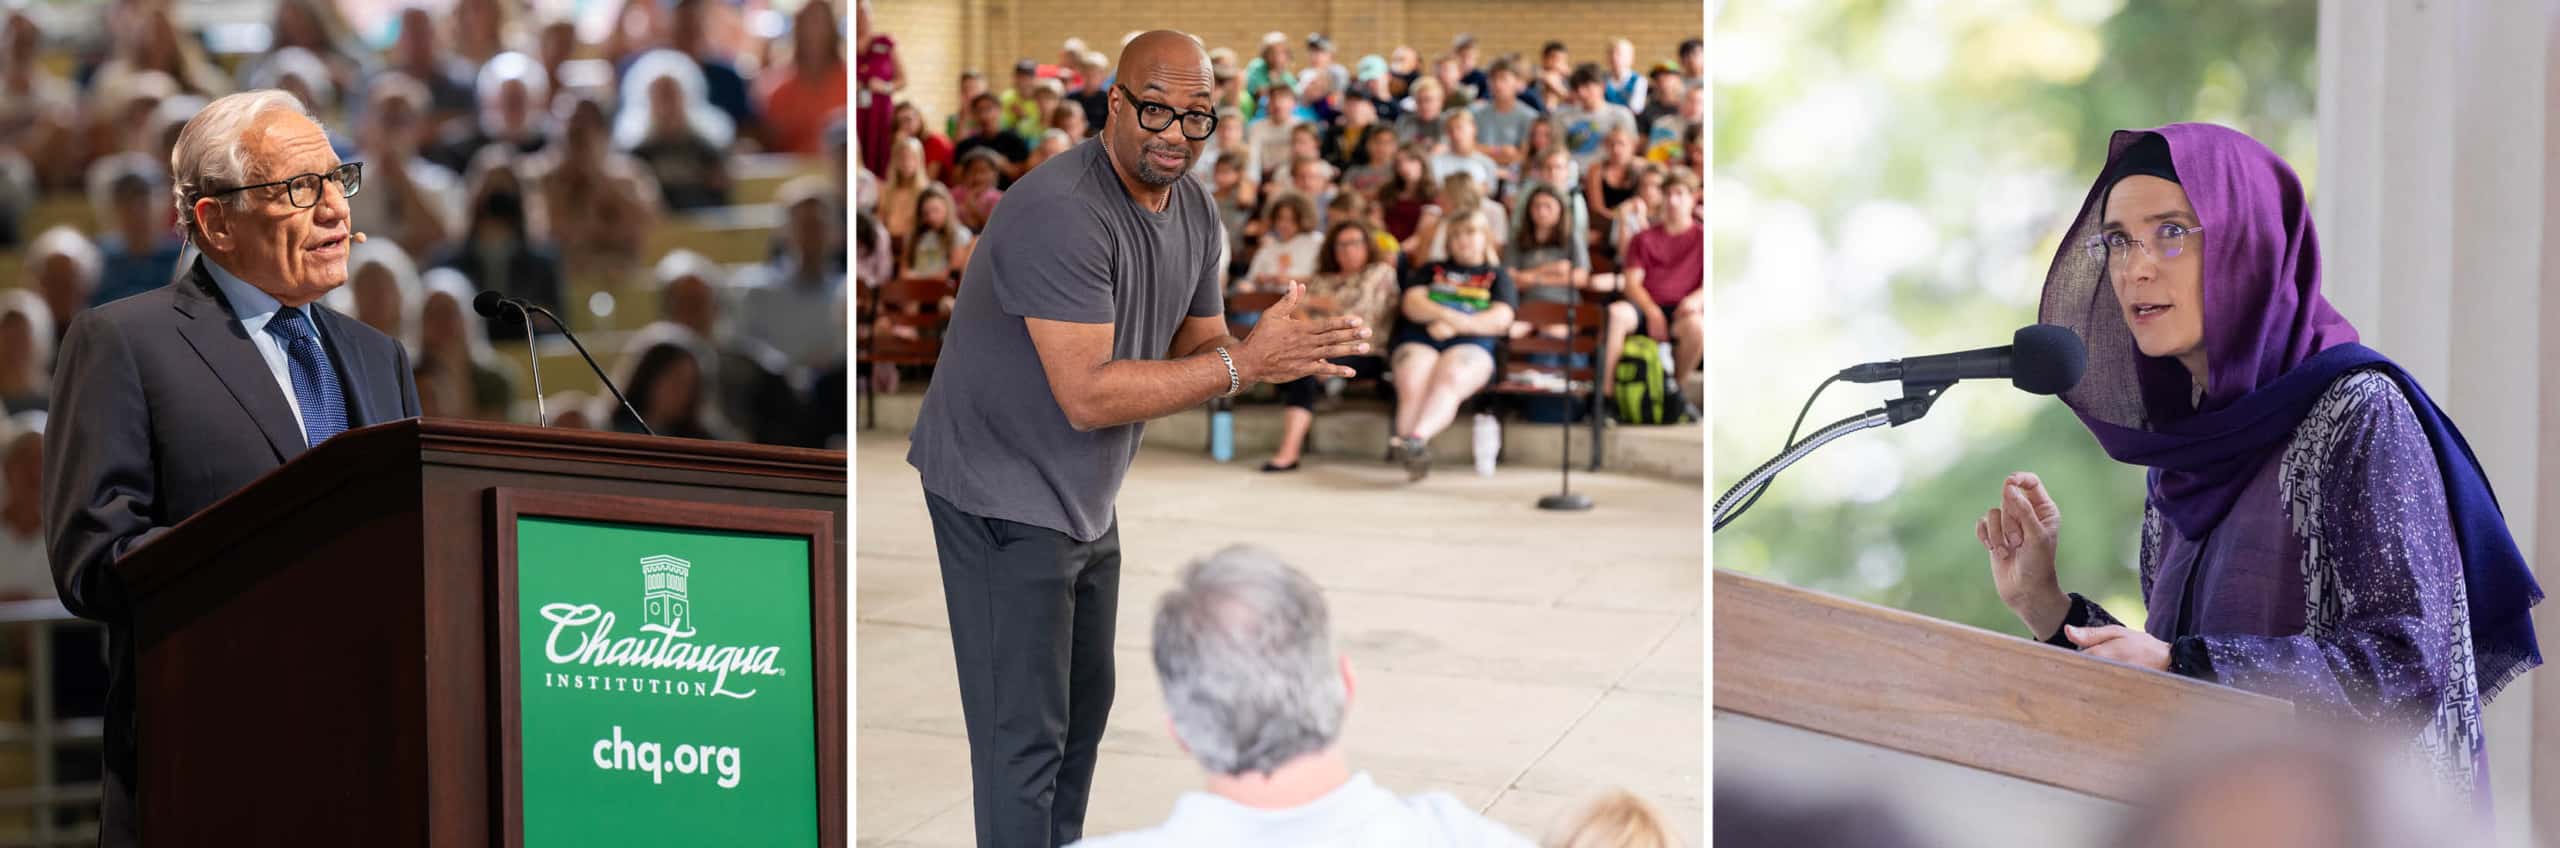 Bob Woodward giving a lecture in the Amphitheater, Kwame Alexander leading a master class in Smith Wilkes Hall and Sevim Kalyoncu giving an interfaith lecture in the Hall of Philosophy.